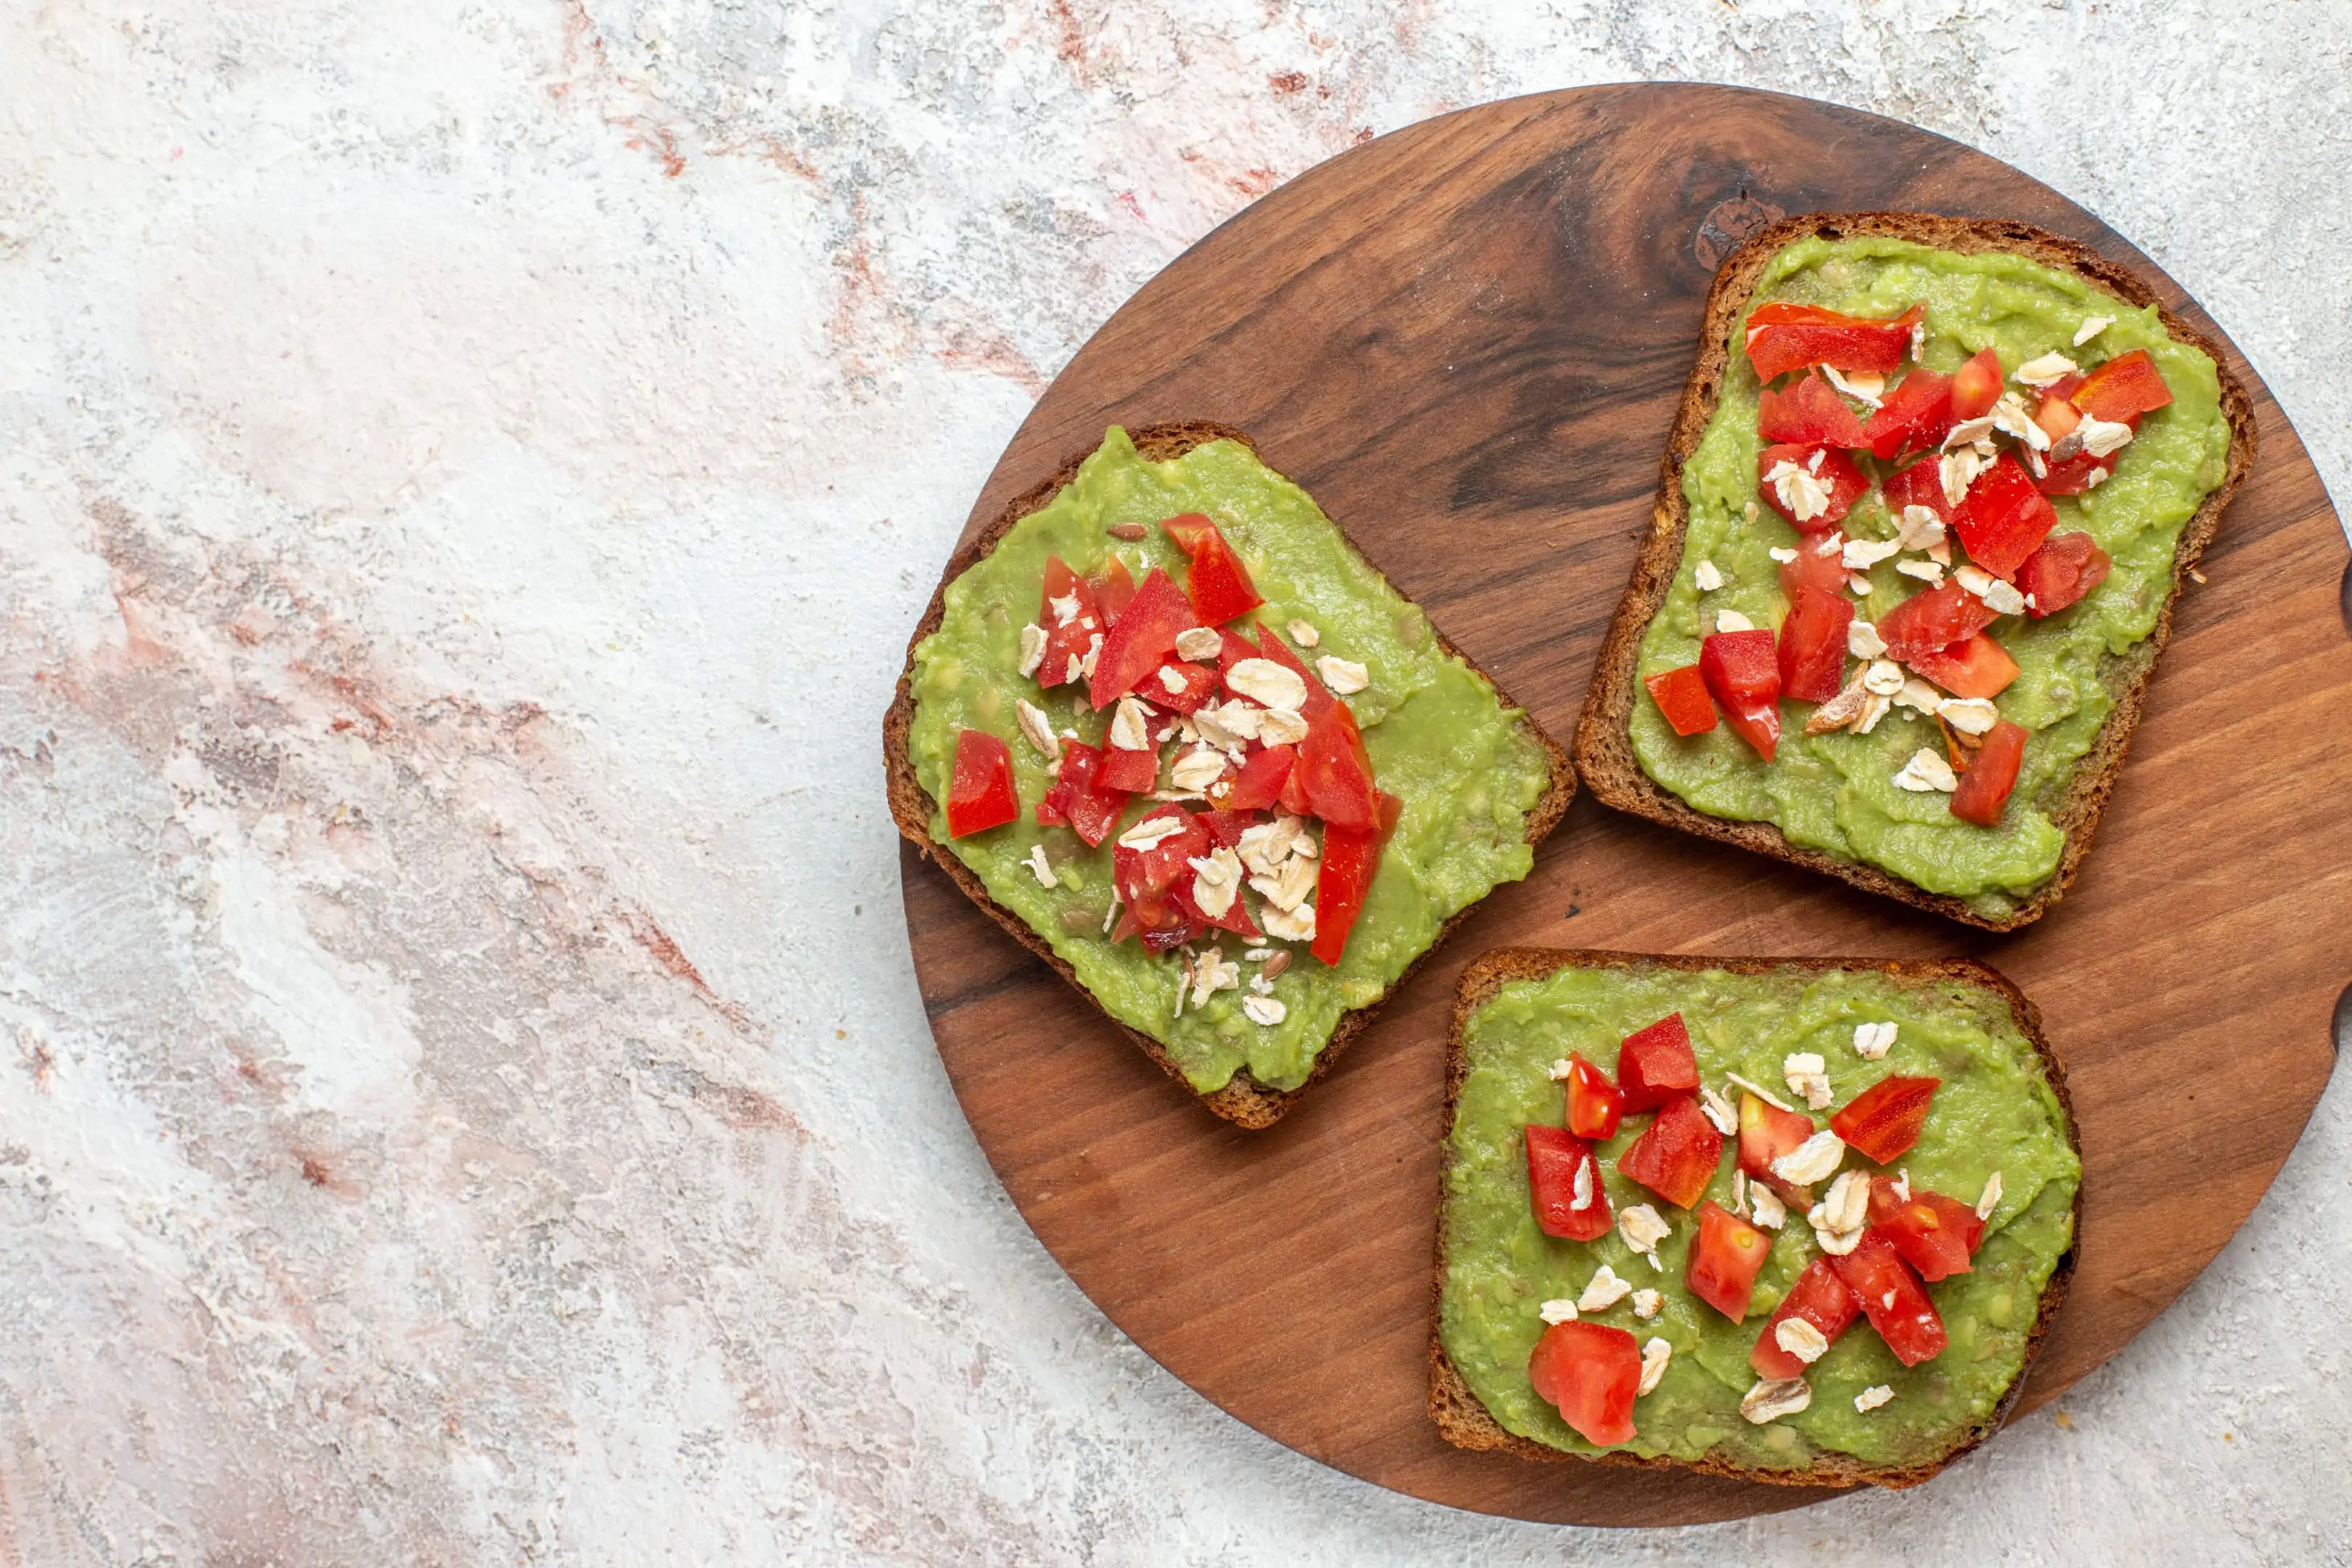 Avocado sandwiches with sliced red tomatoes and oats